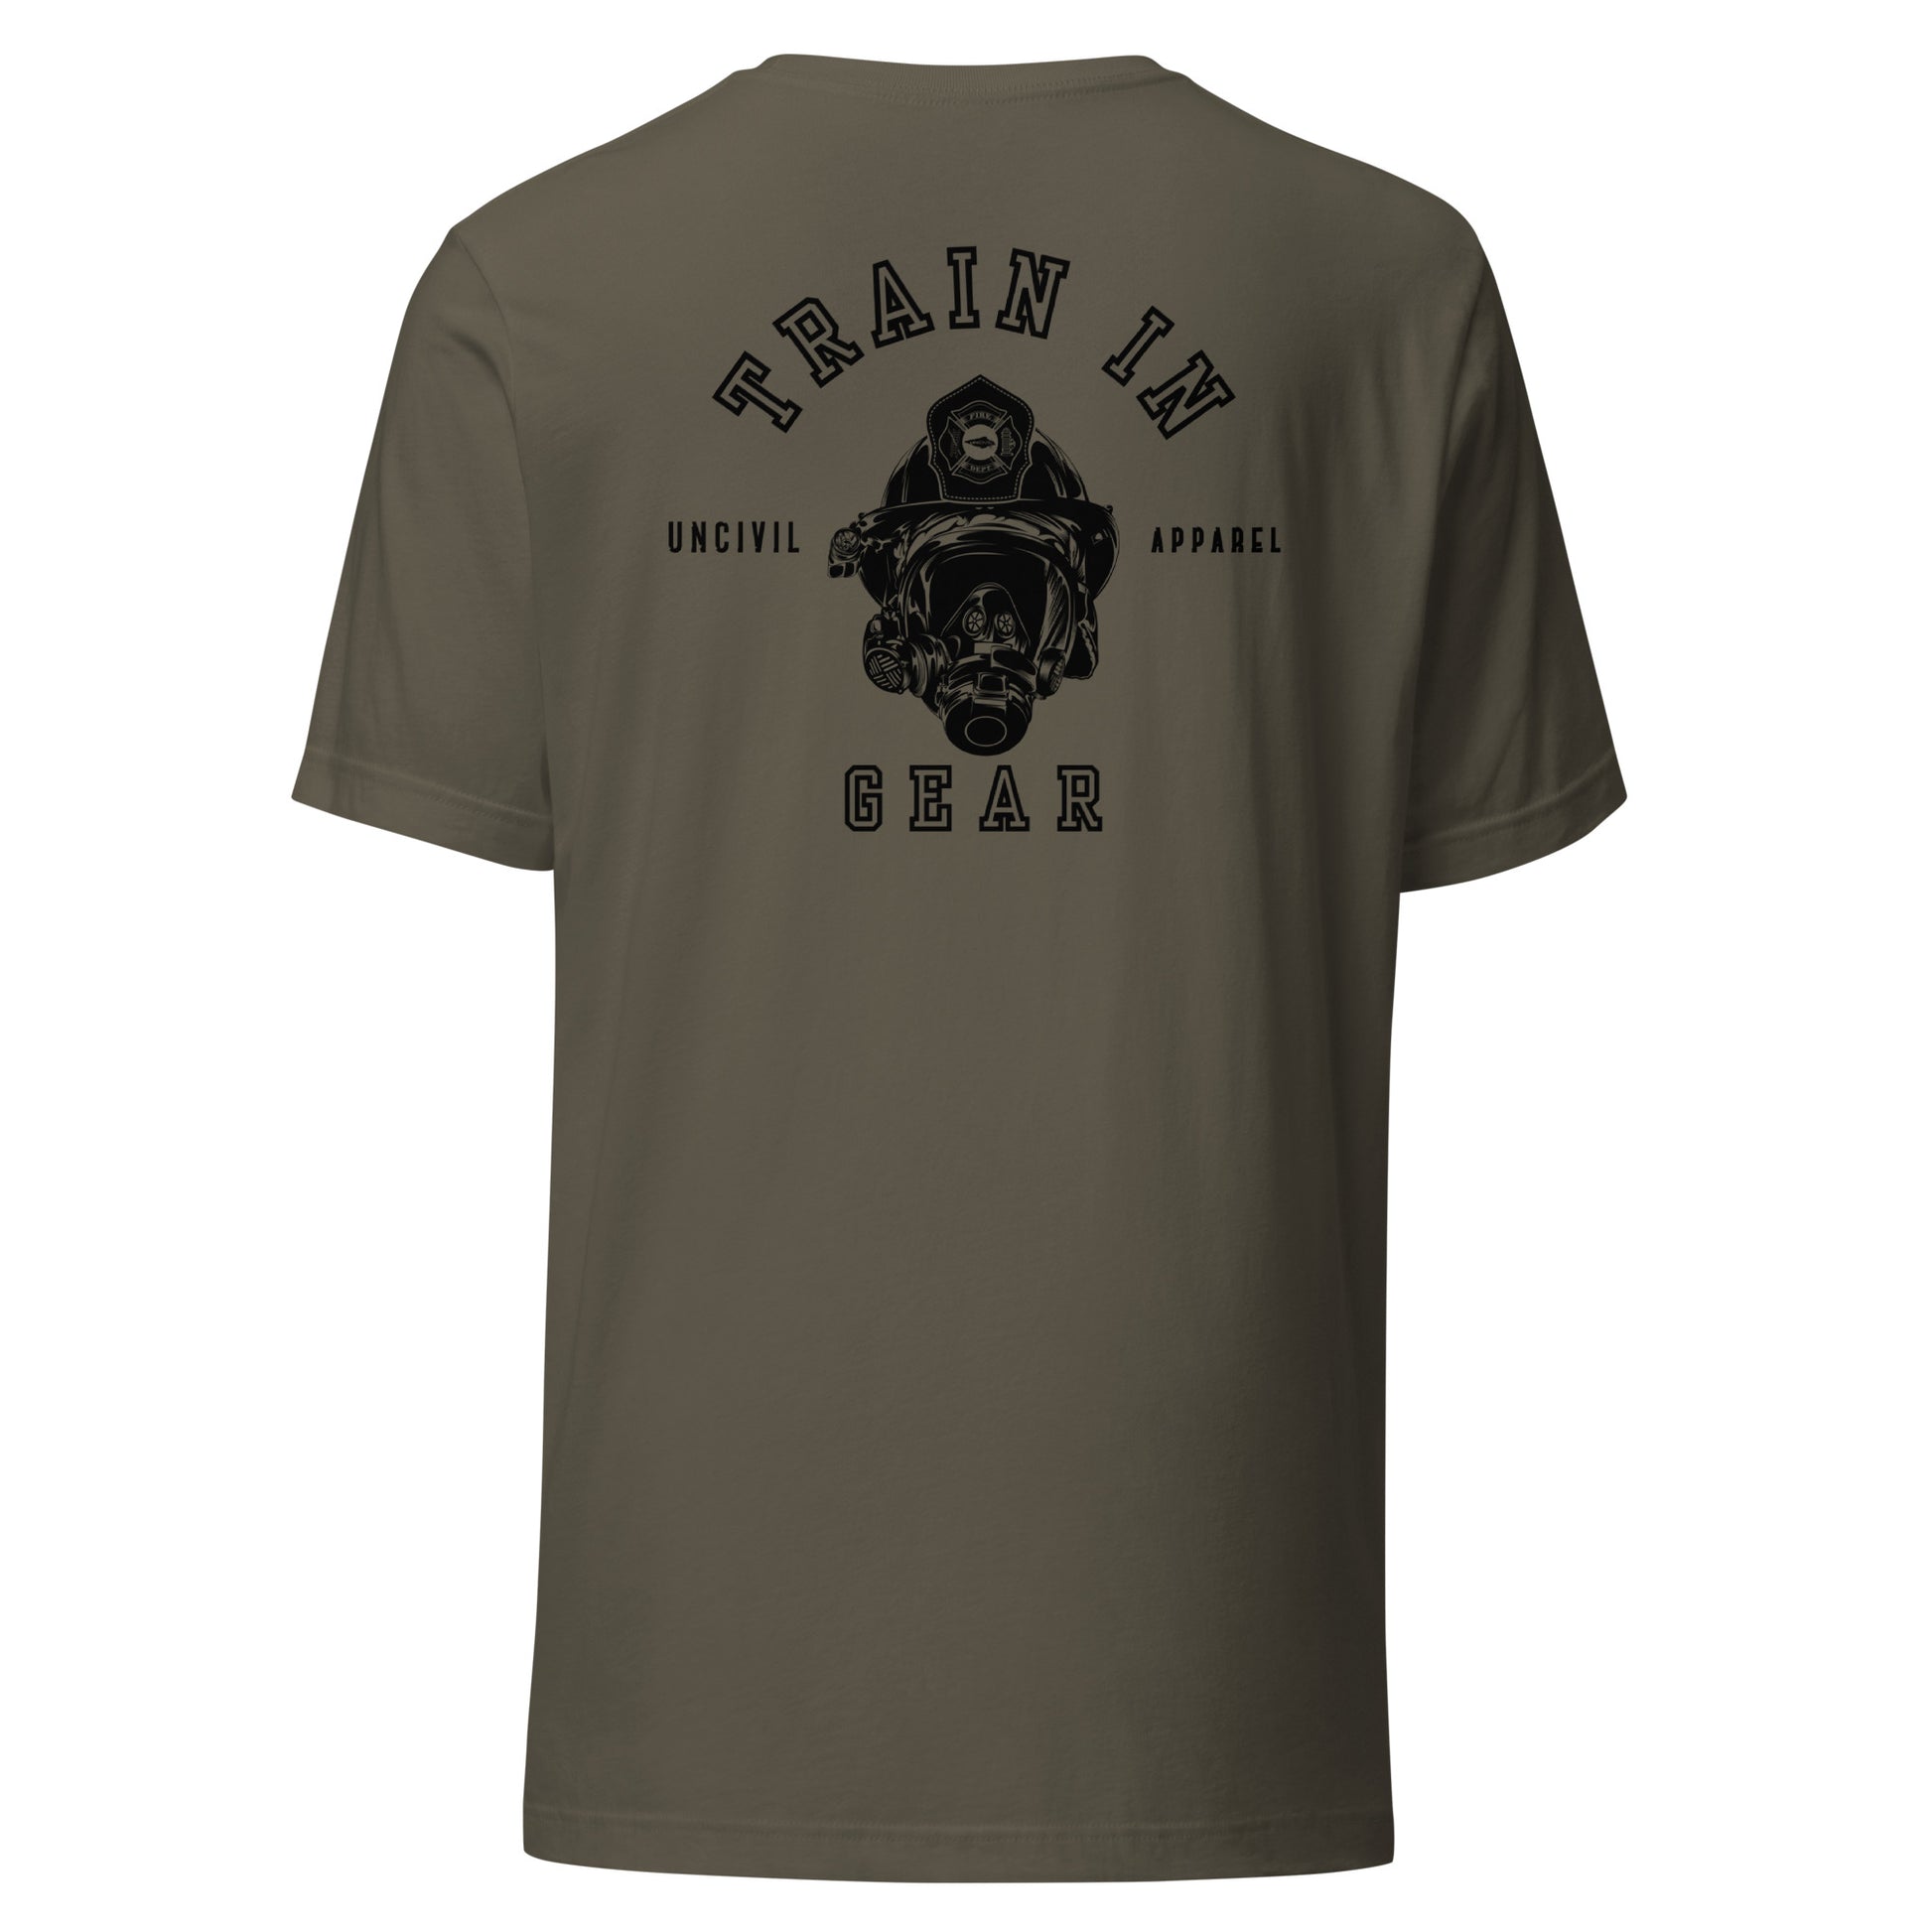 Train in Gear Graphic T-shirt, Firefighter and Military shirts, Army Green.